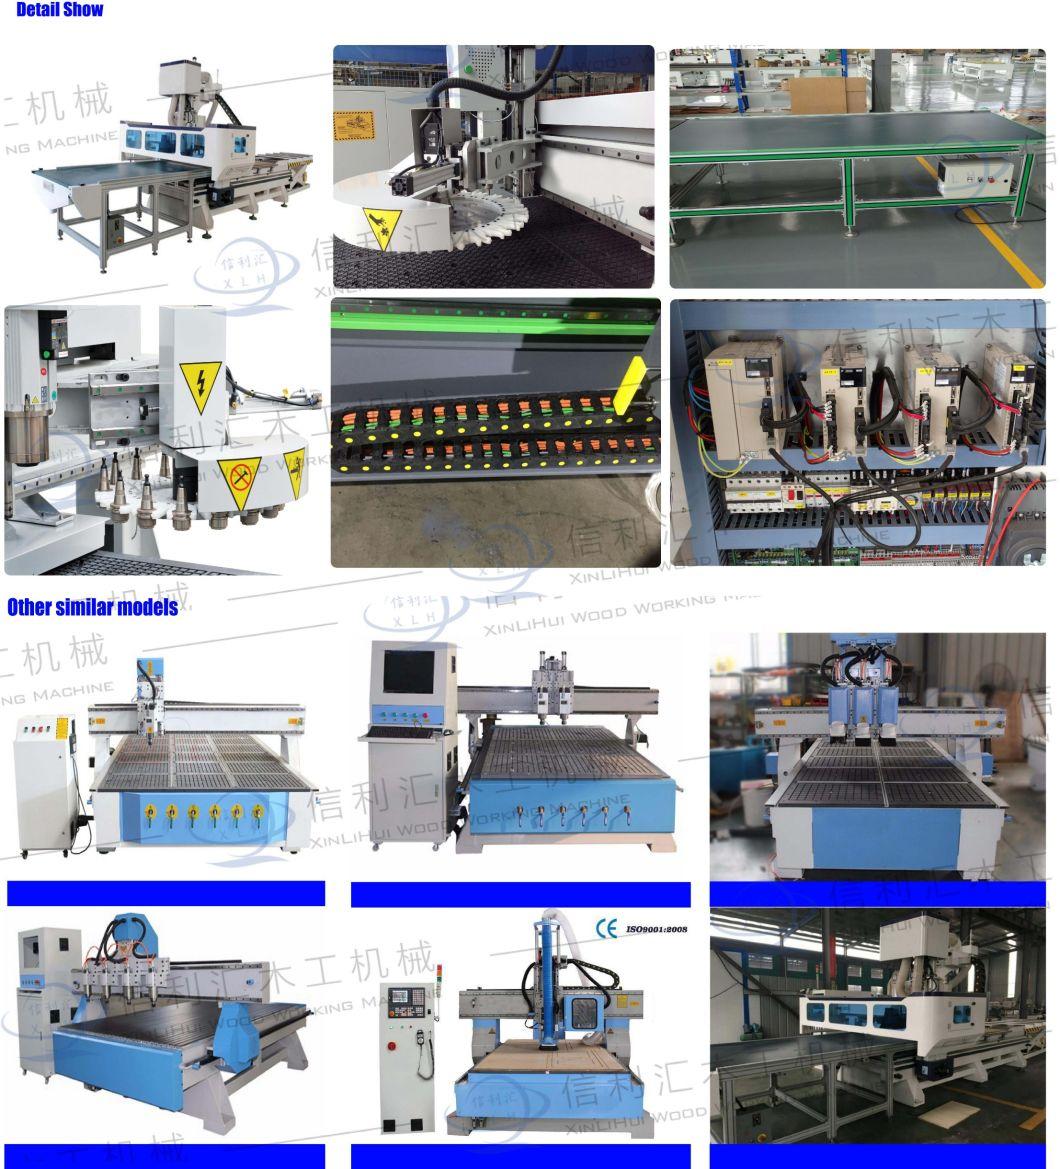 Best Price Multi-Function Marble Cutting Wood Carving Milling CNC Router Machine to Create Holes for Locks/Handles for The Wooden/ MDF Doors.